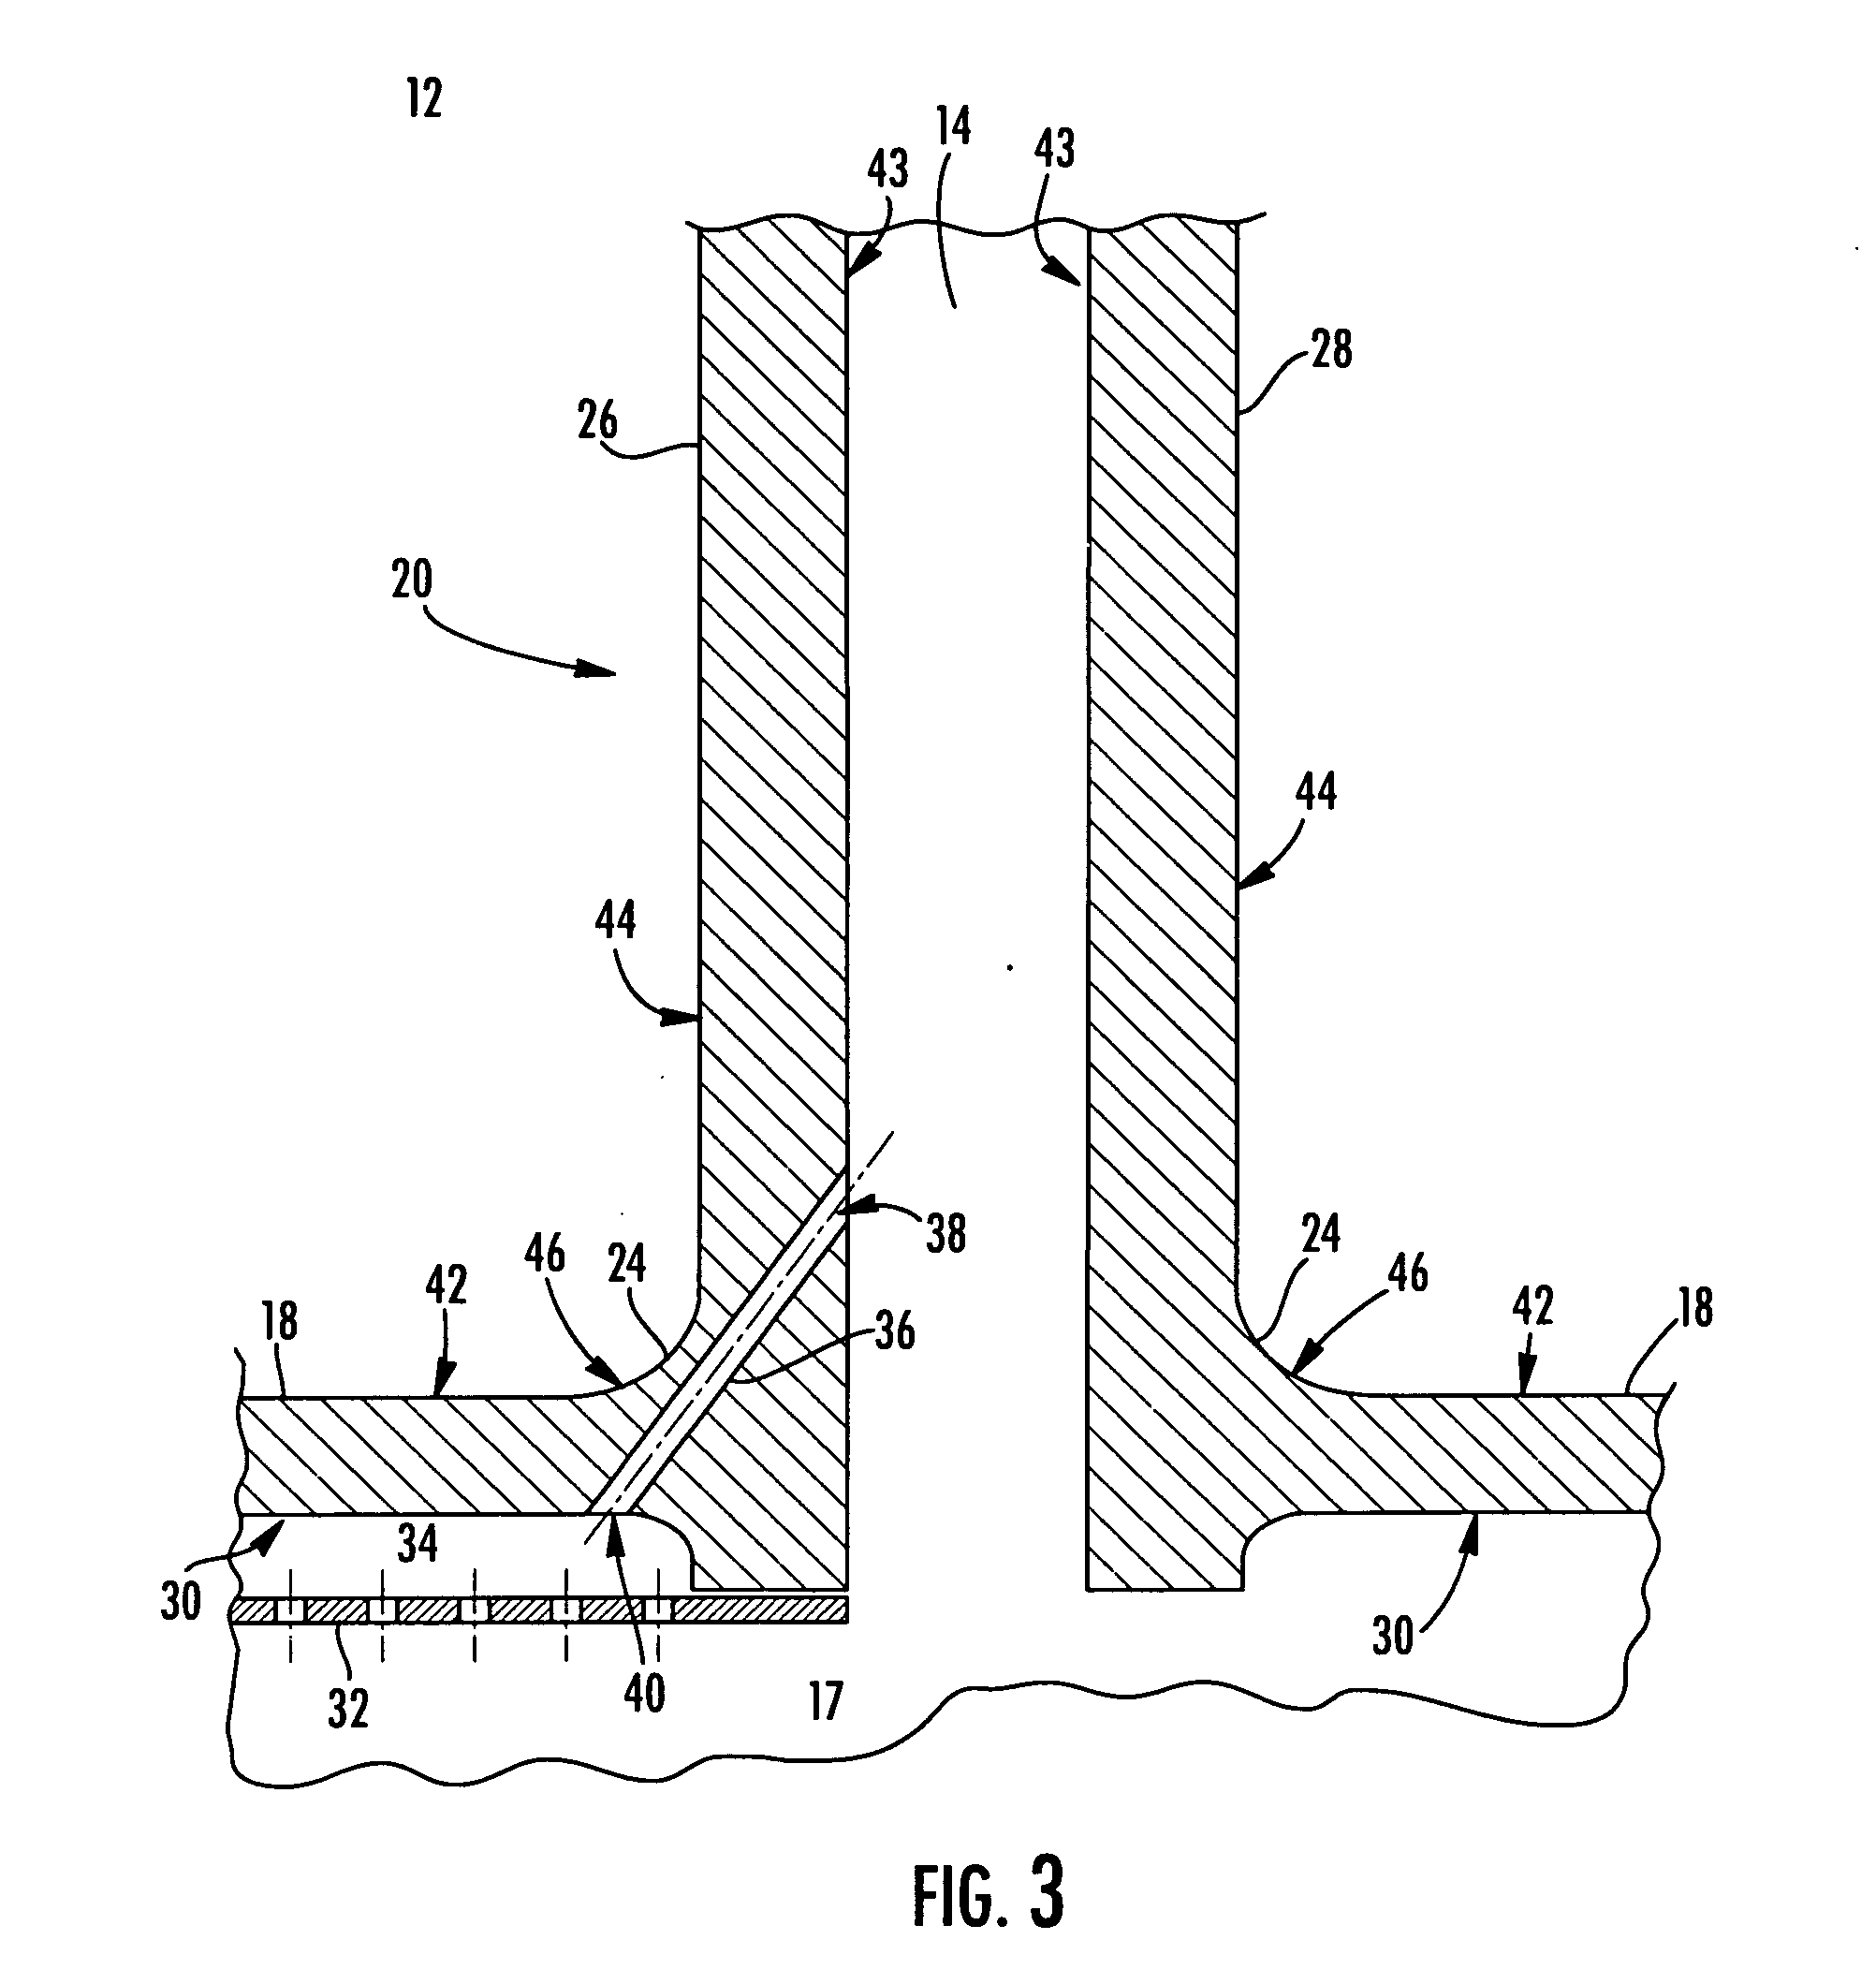 Advanced cooling method for combustion turbine airfoil fillets